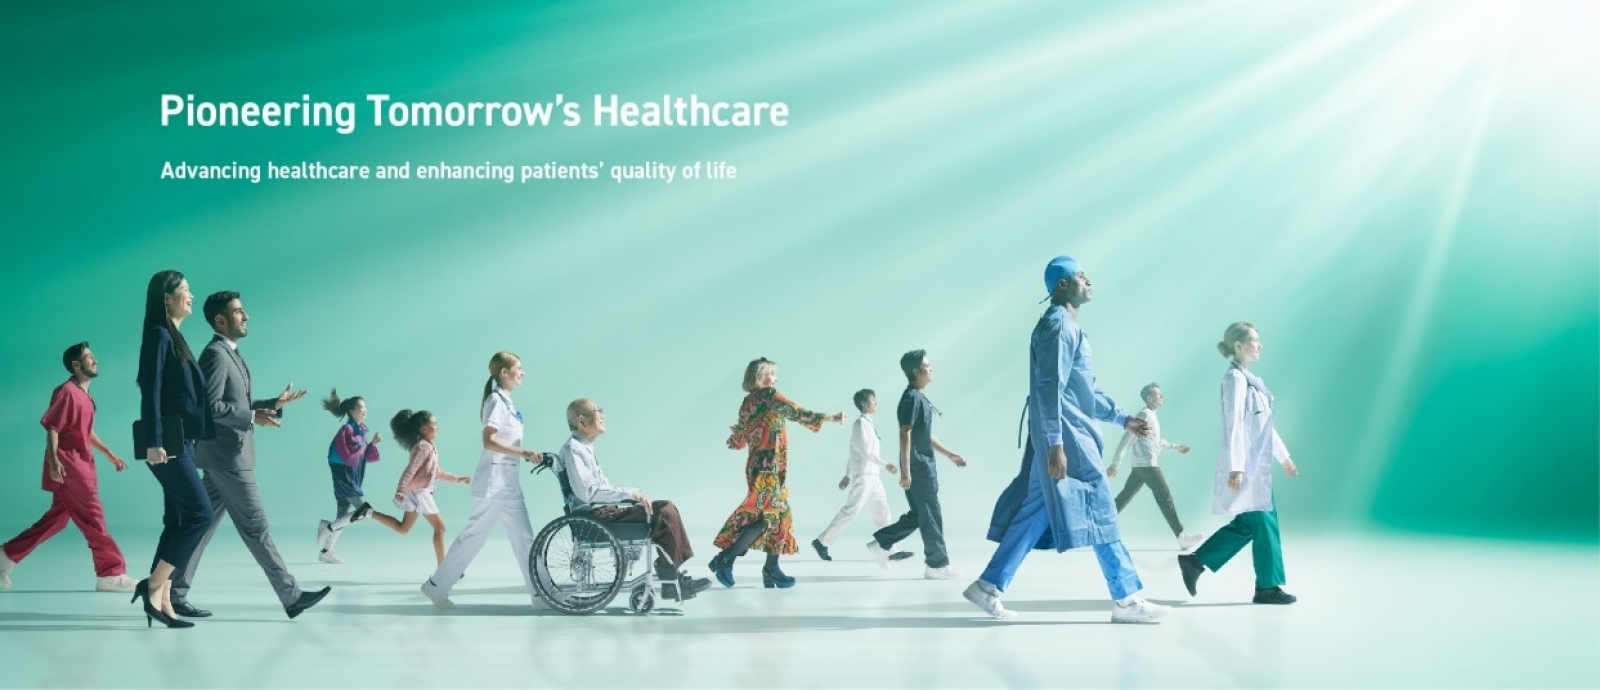 Healthcare professionals, patients and workers walking forward together